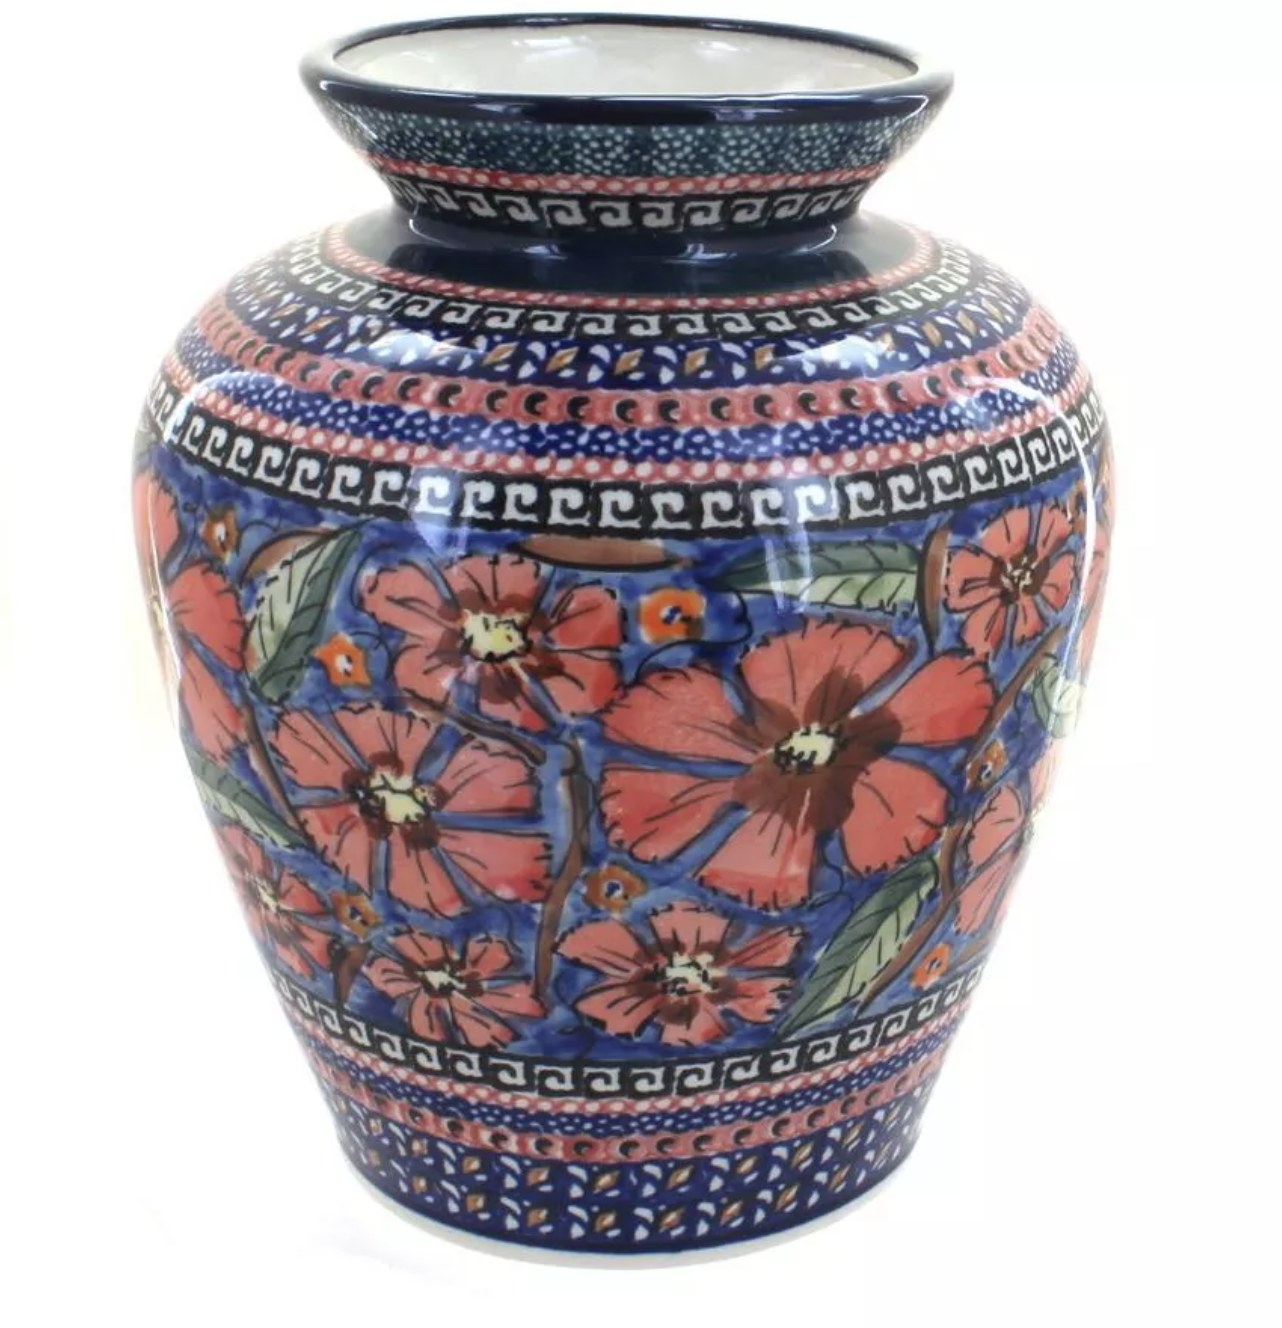 The rounded vase has red flowers and multicolored patterns